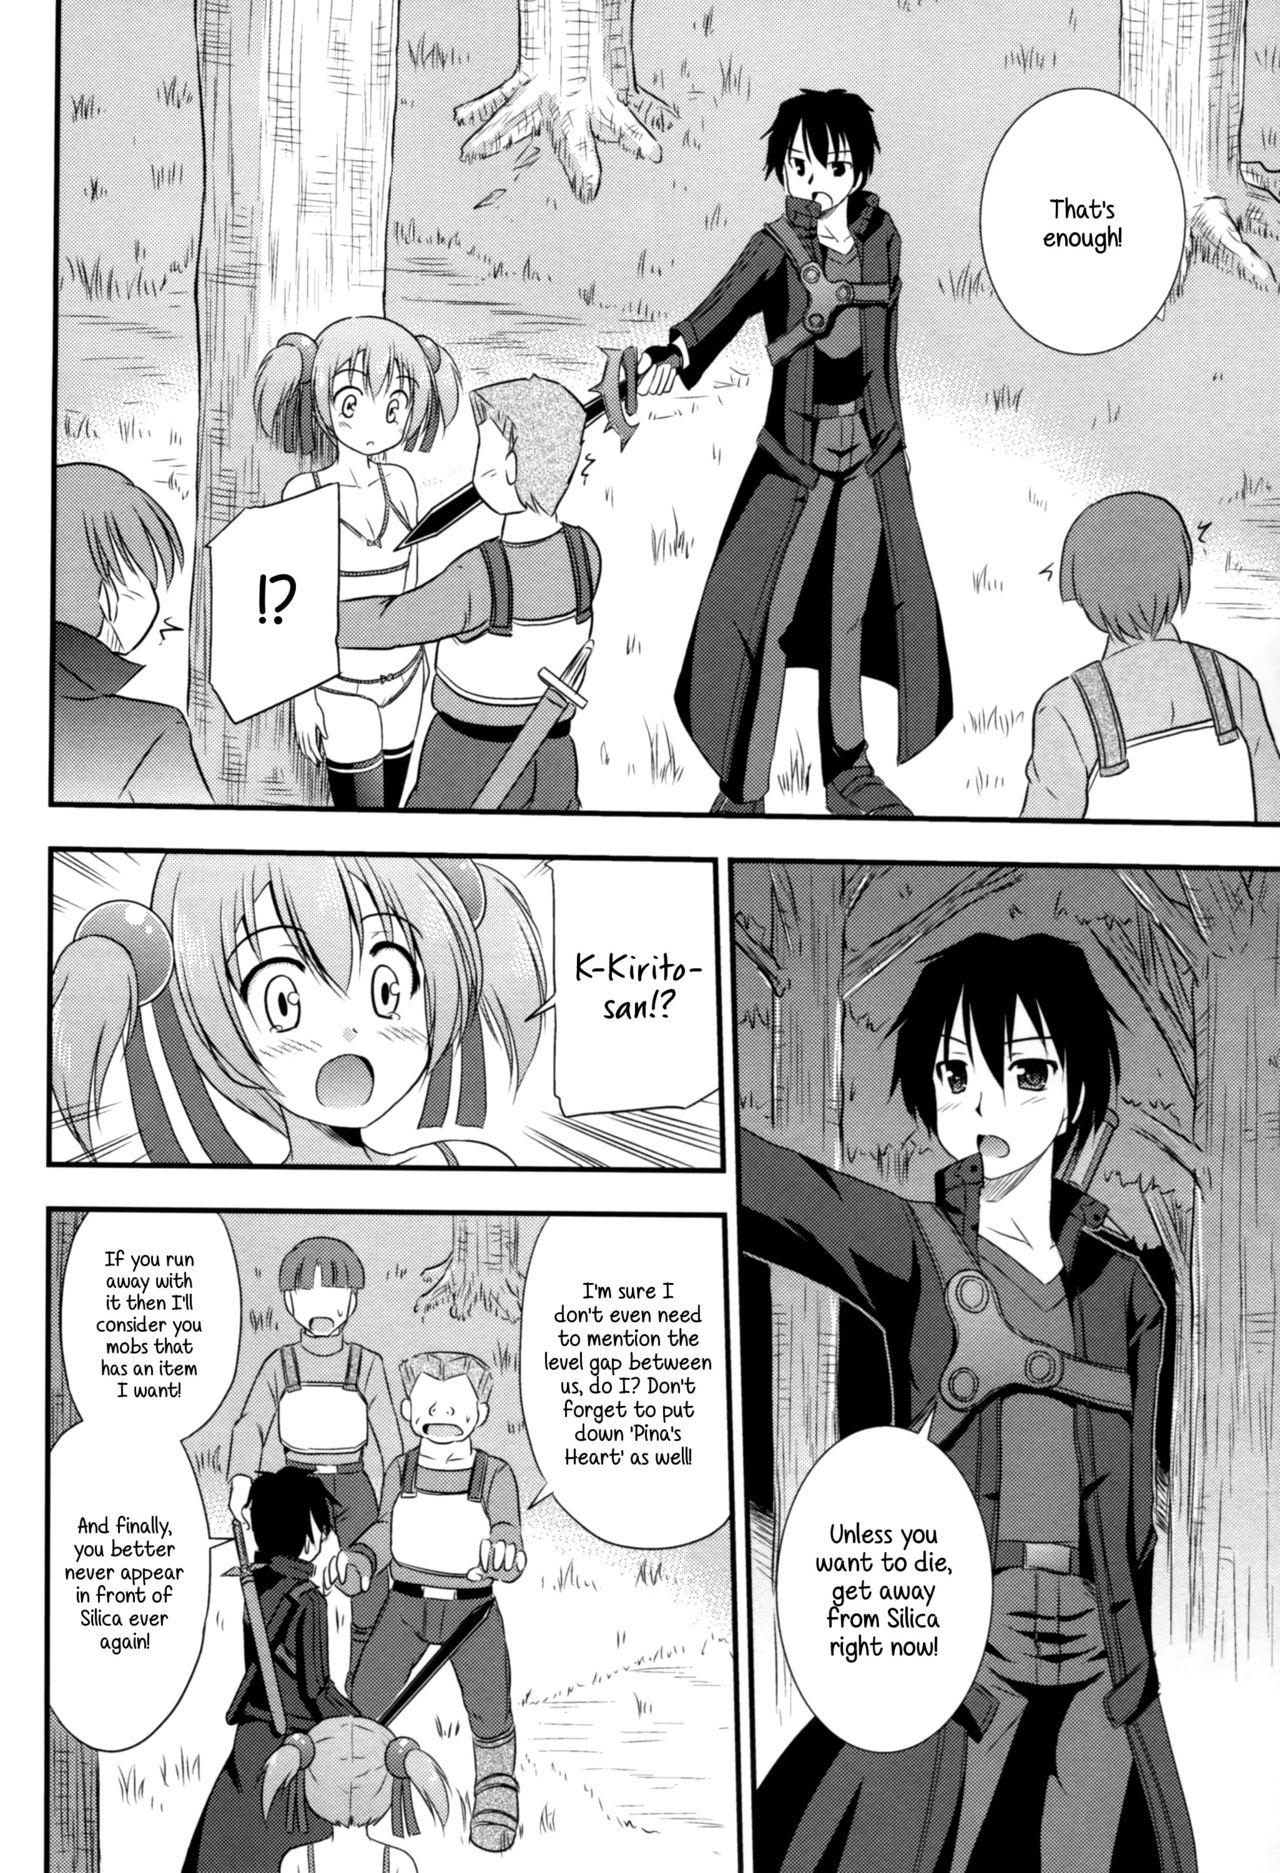 Leggings Silica Route Online - Sword art online Butts - Page 9